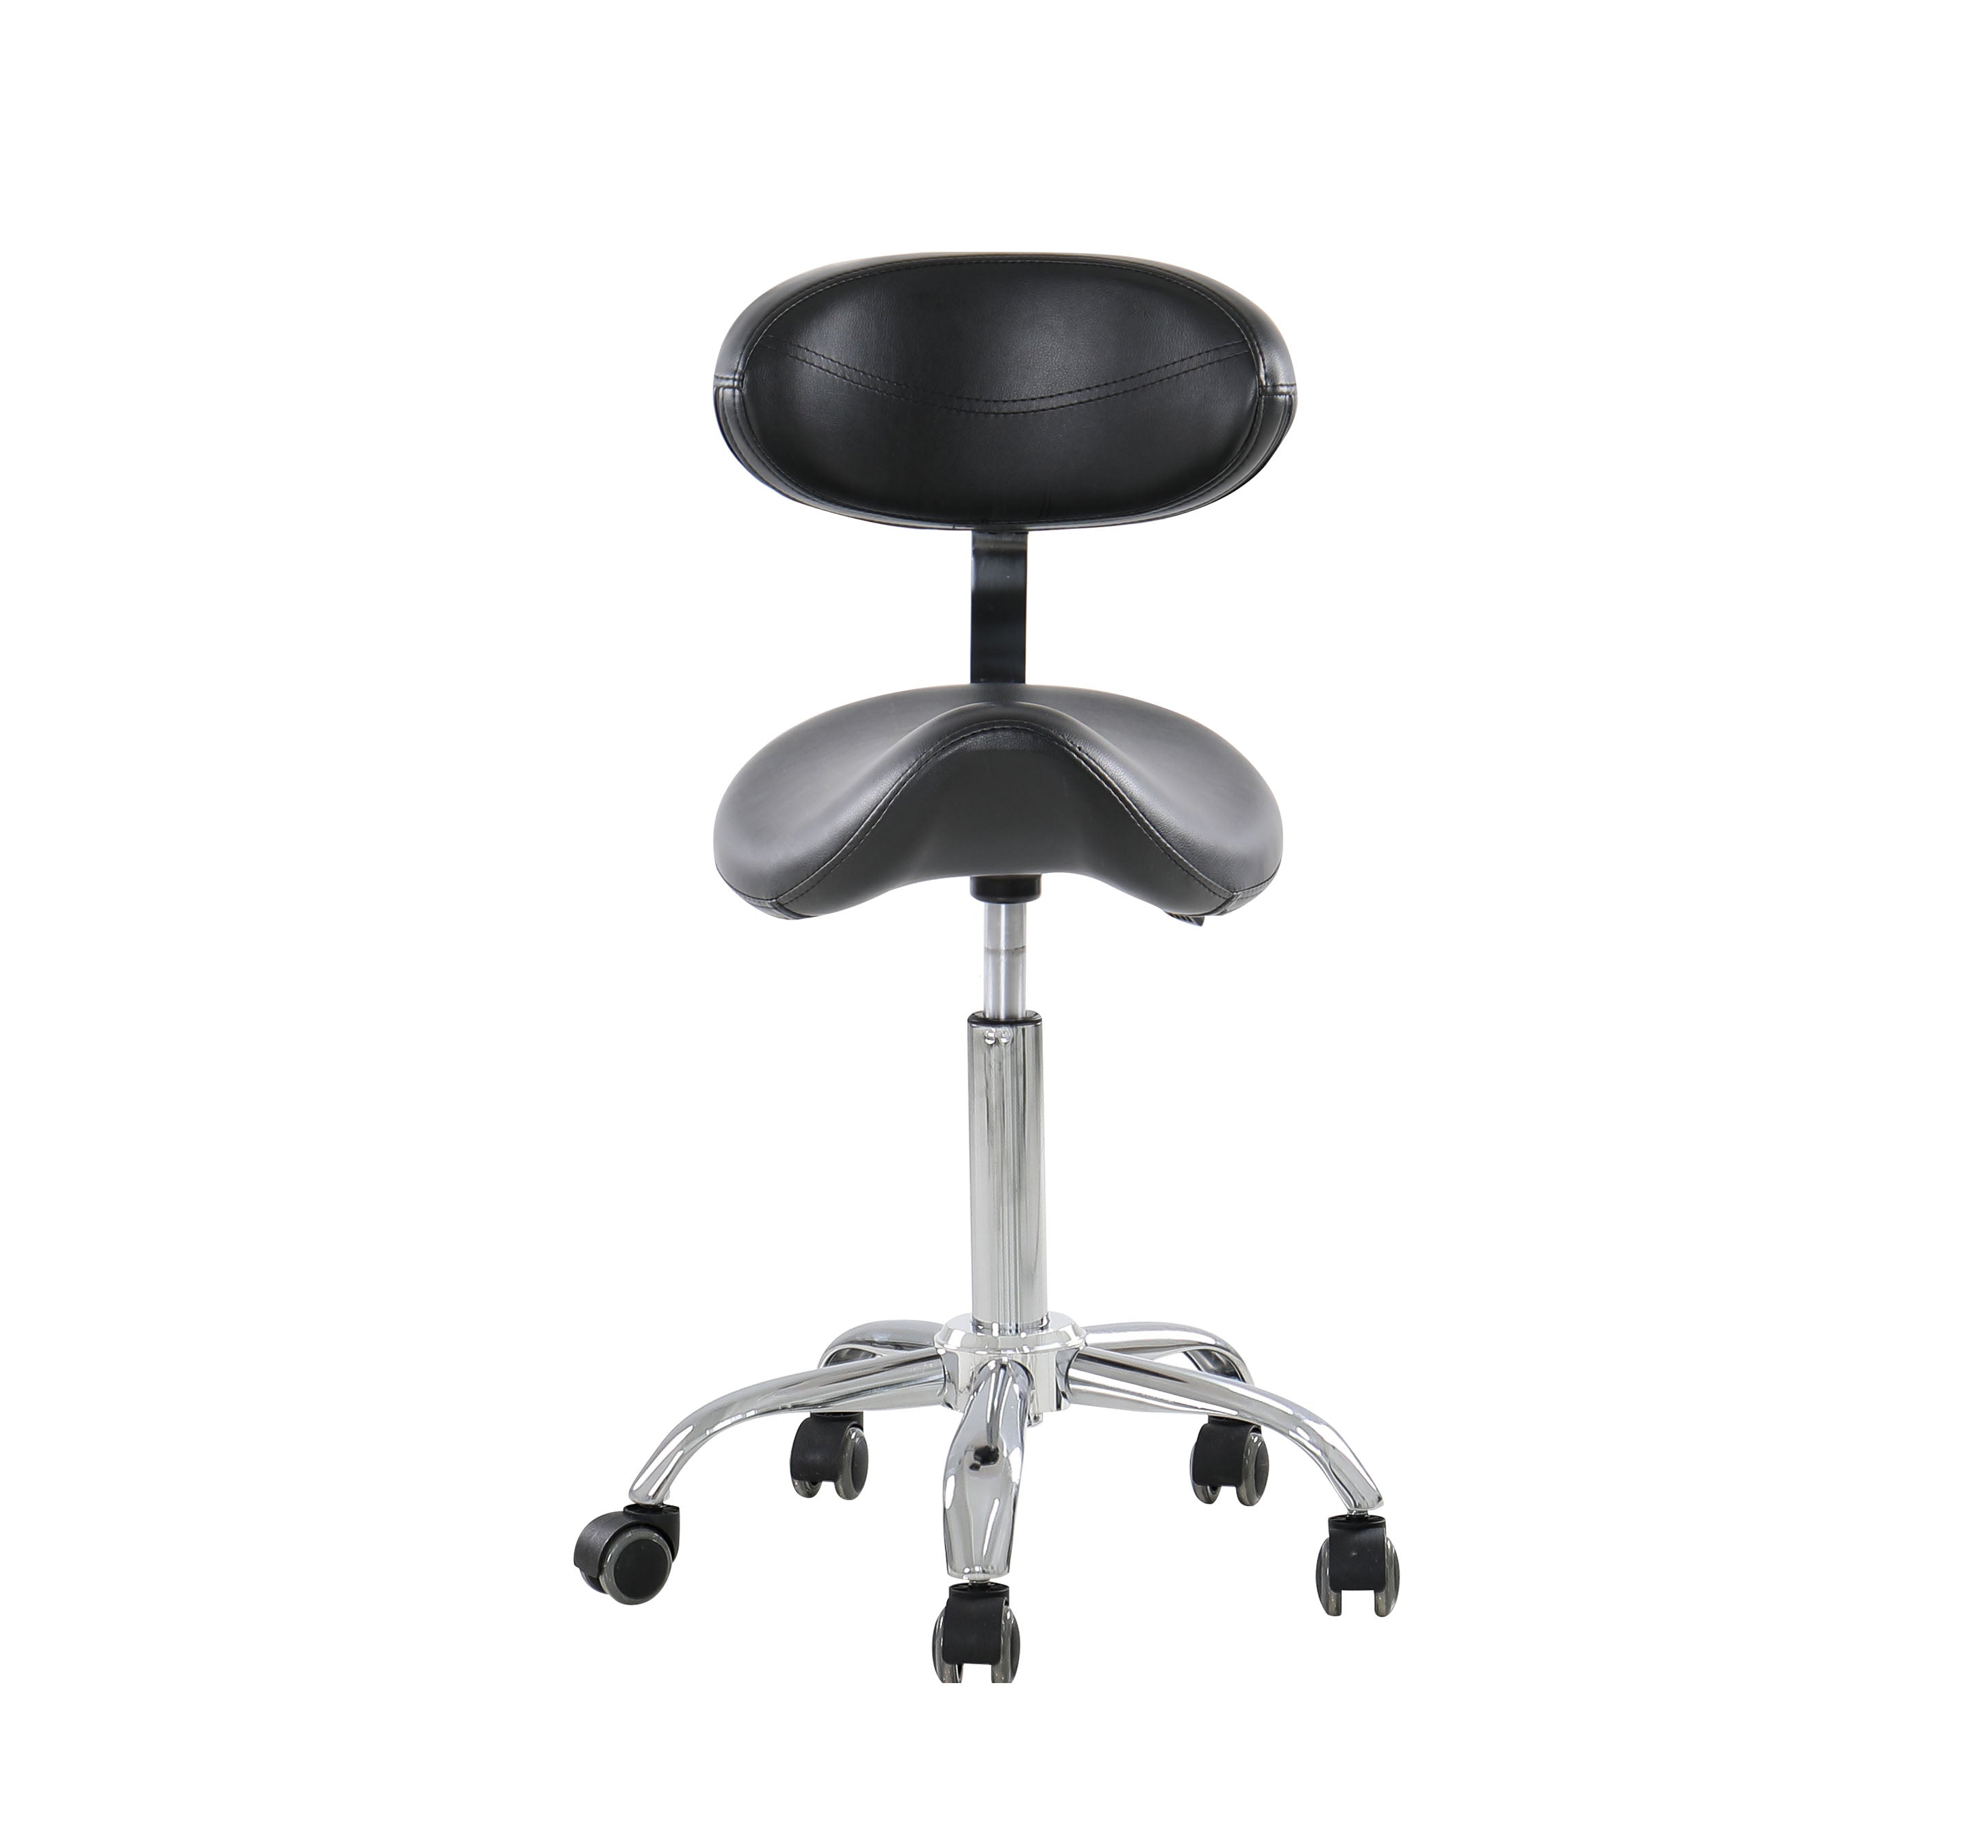 Saddle Salon Facial chair swiveling with backrest